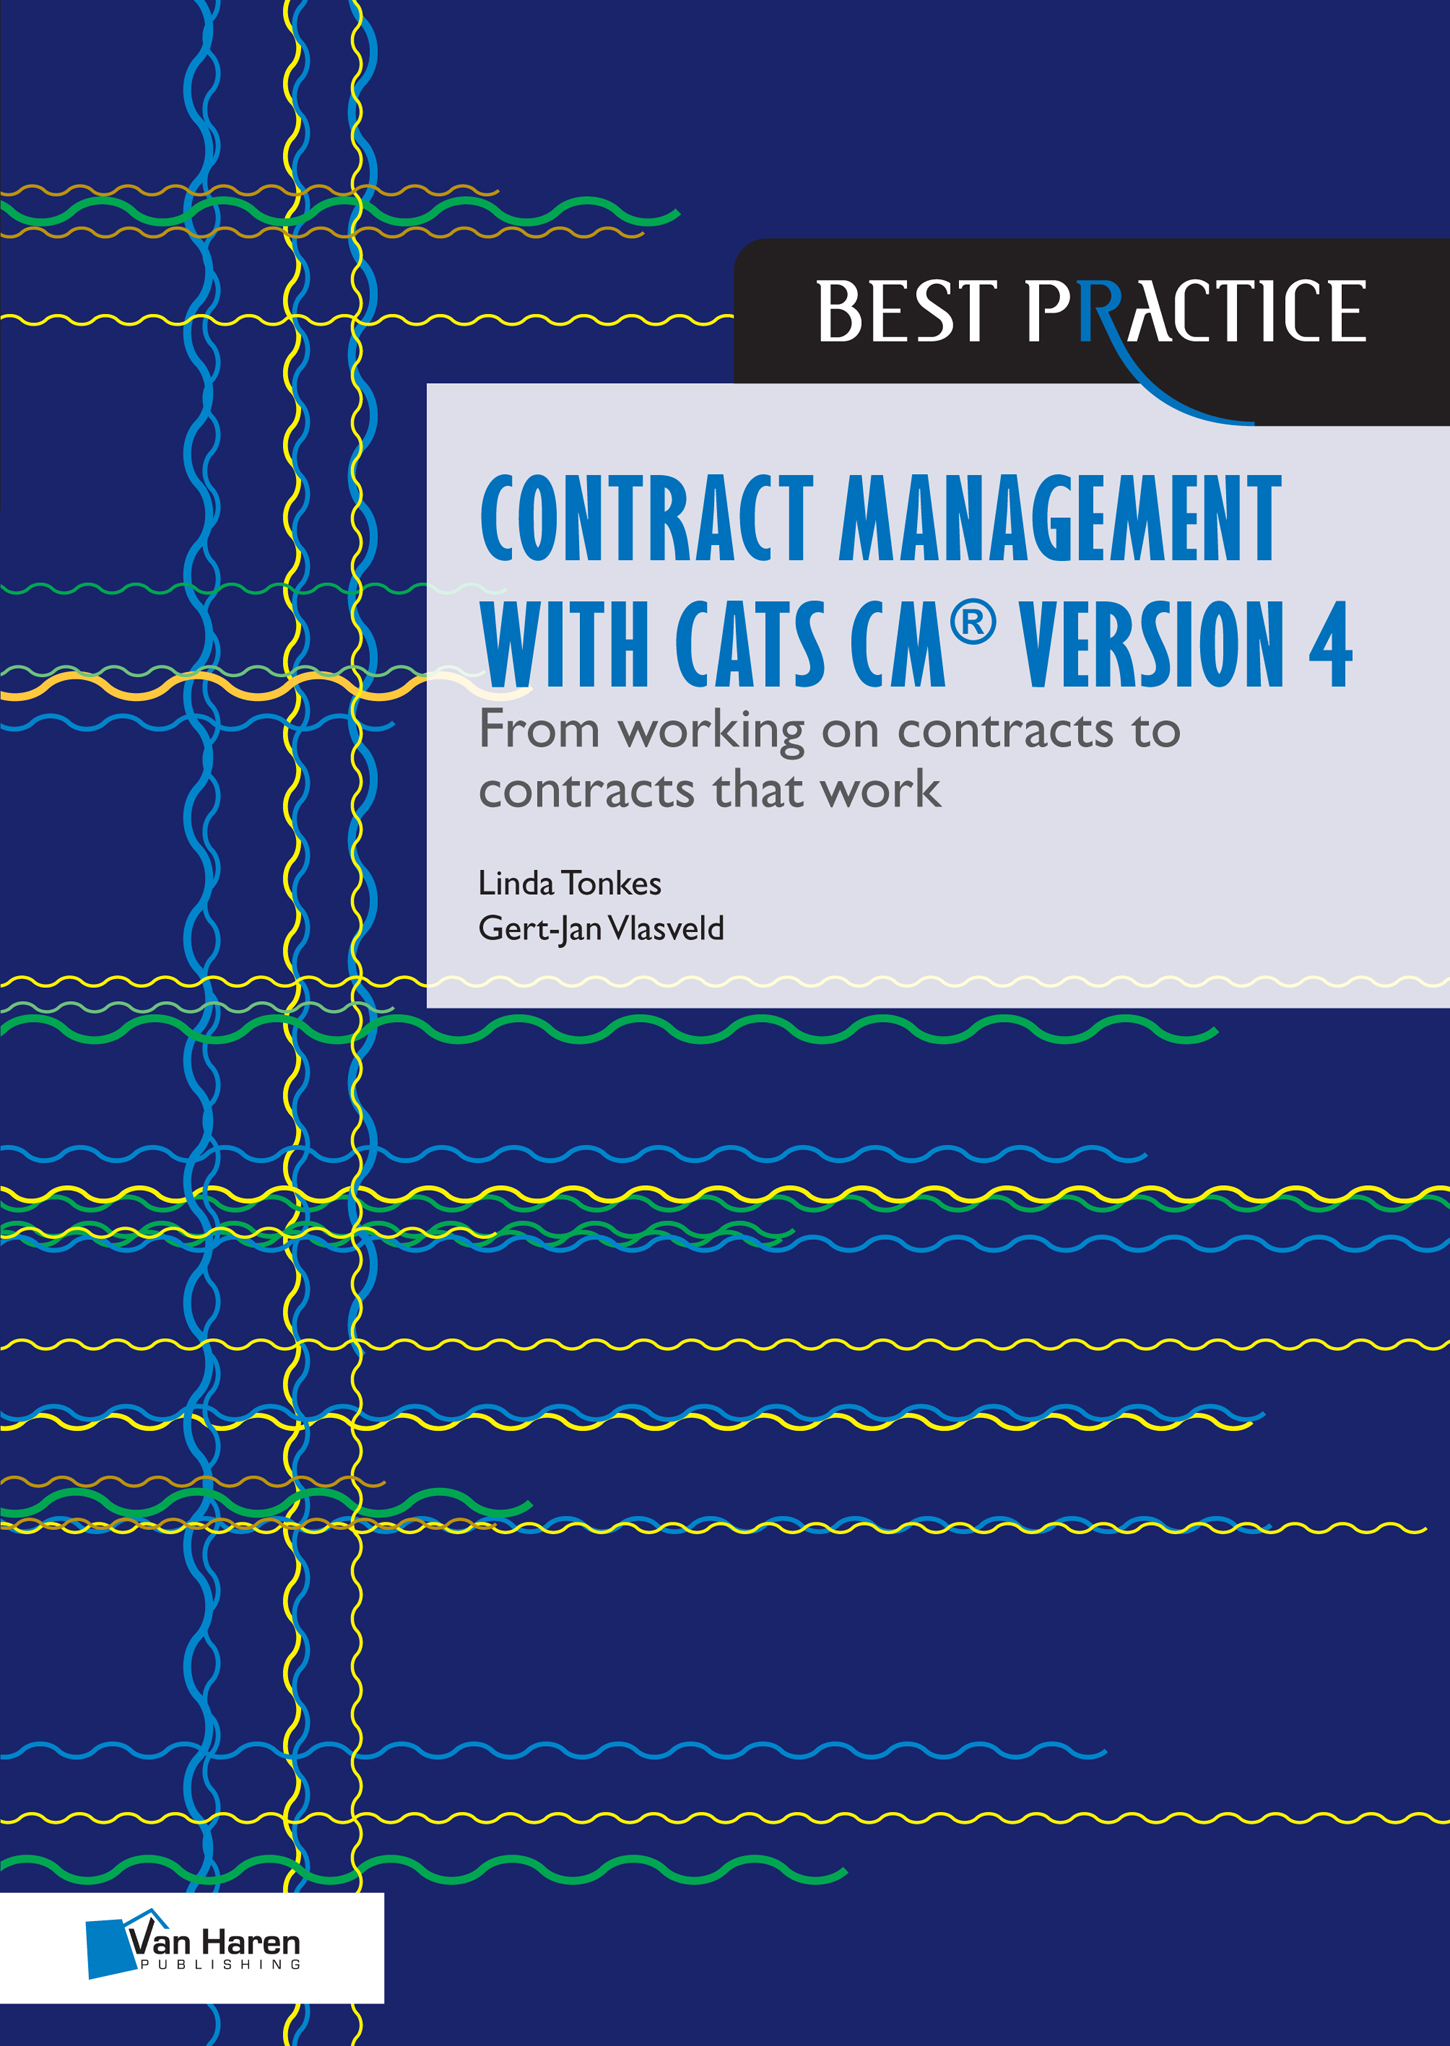 Contract management with CATS CM version 4: From working on contracts to contracts that work